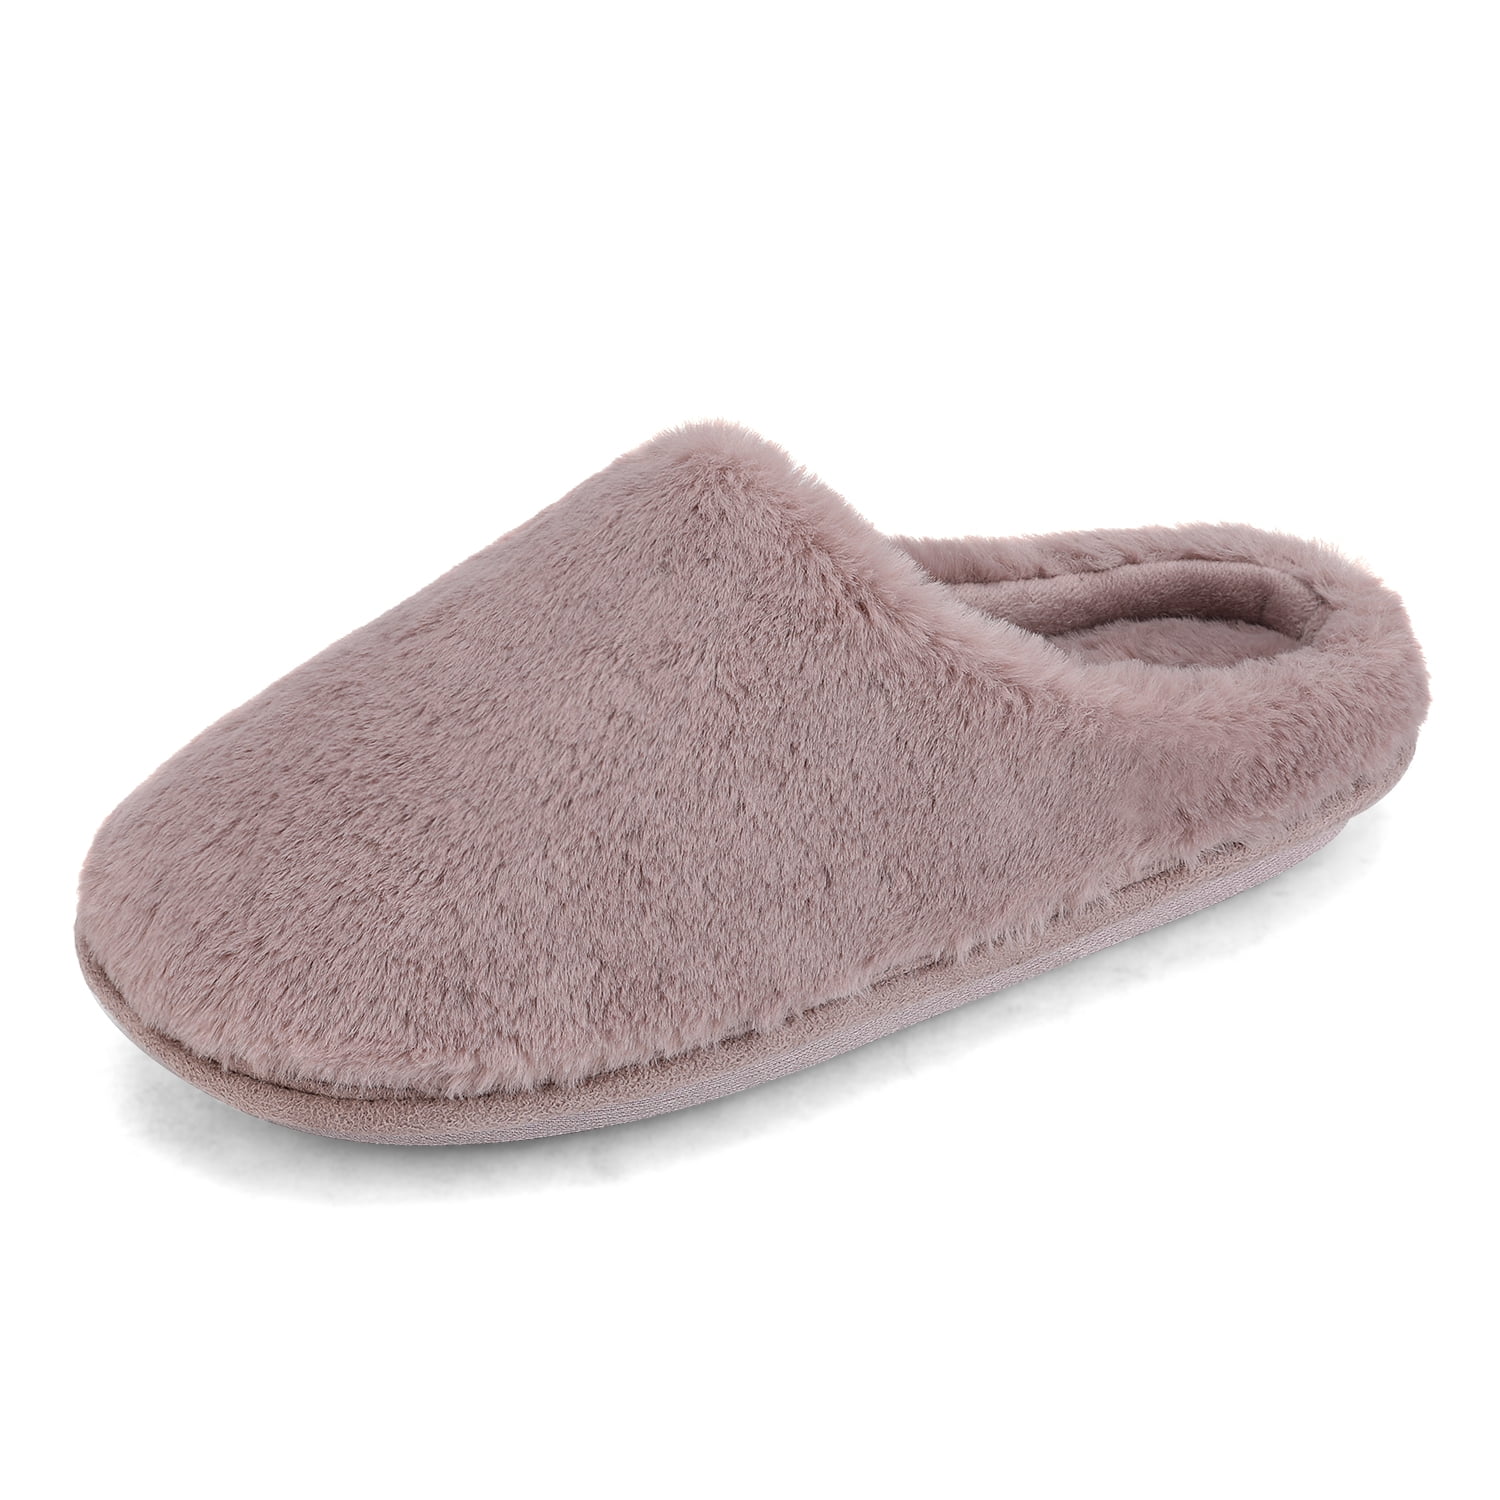 DREAM PAIRS Women's House Memory Foam Slippers Fuzzy Fluffy Slip On Indoor Bedroom Furry Cute Slip On Home Faux Fur Soft Shoes 